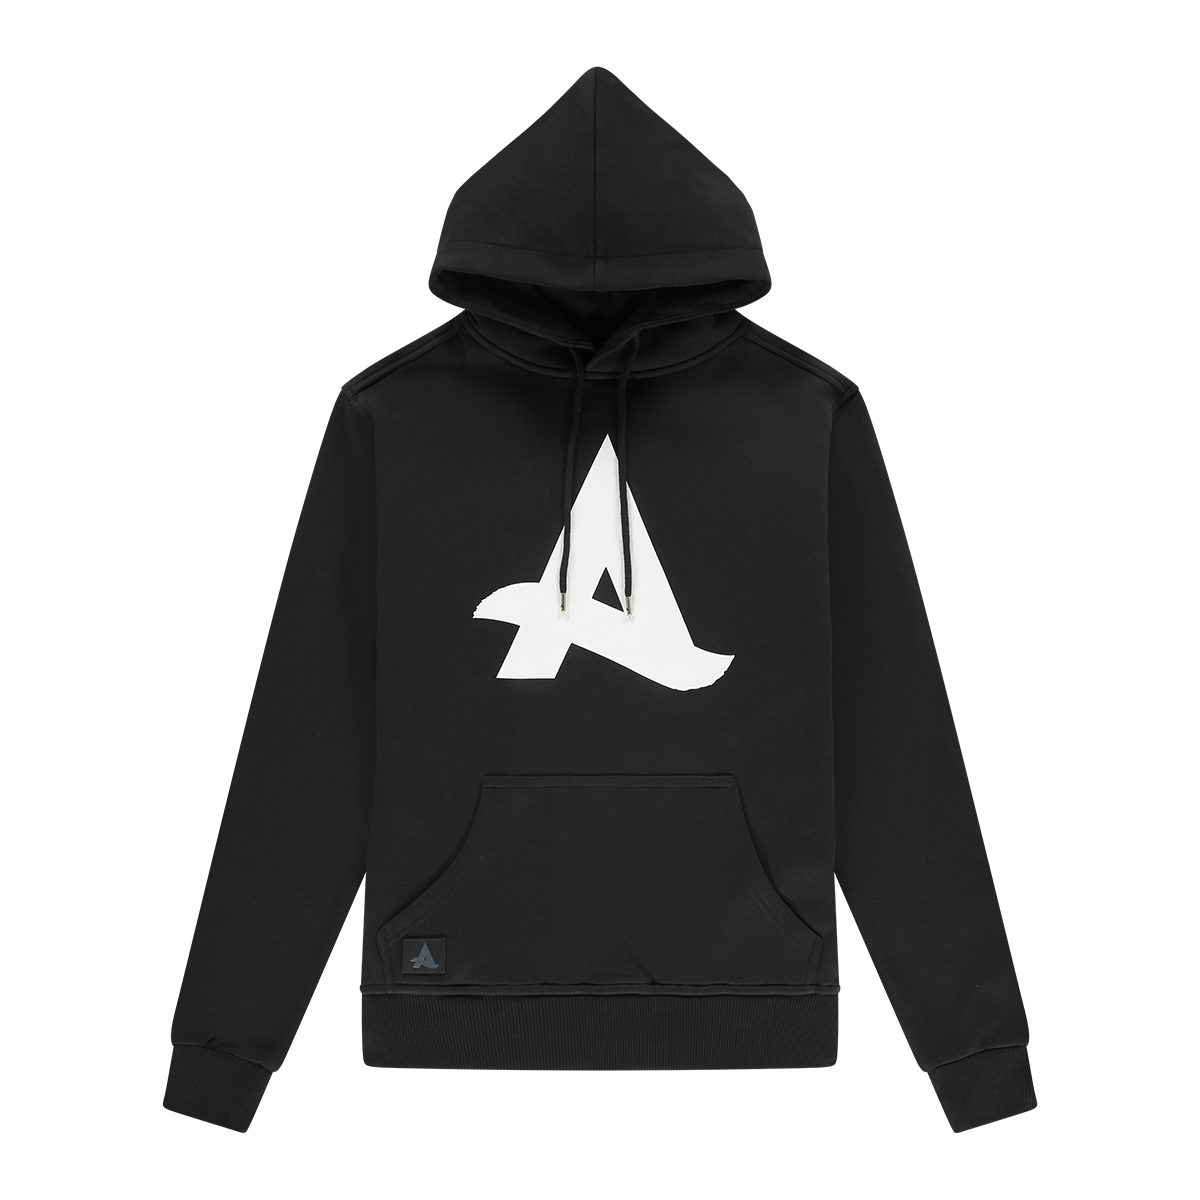 Afrojack_official-hoodie-black-front